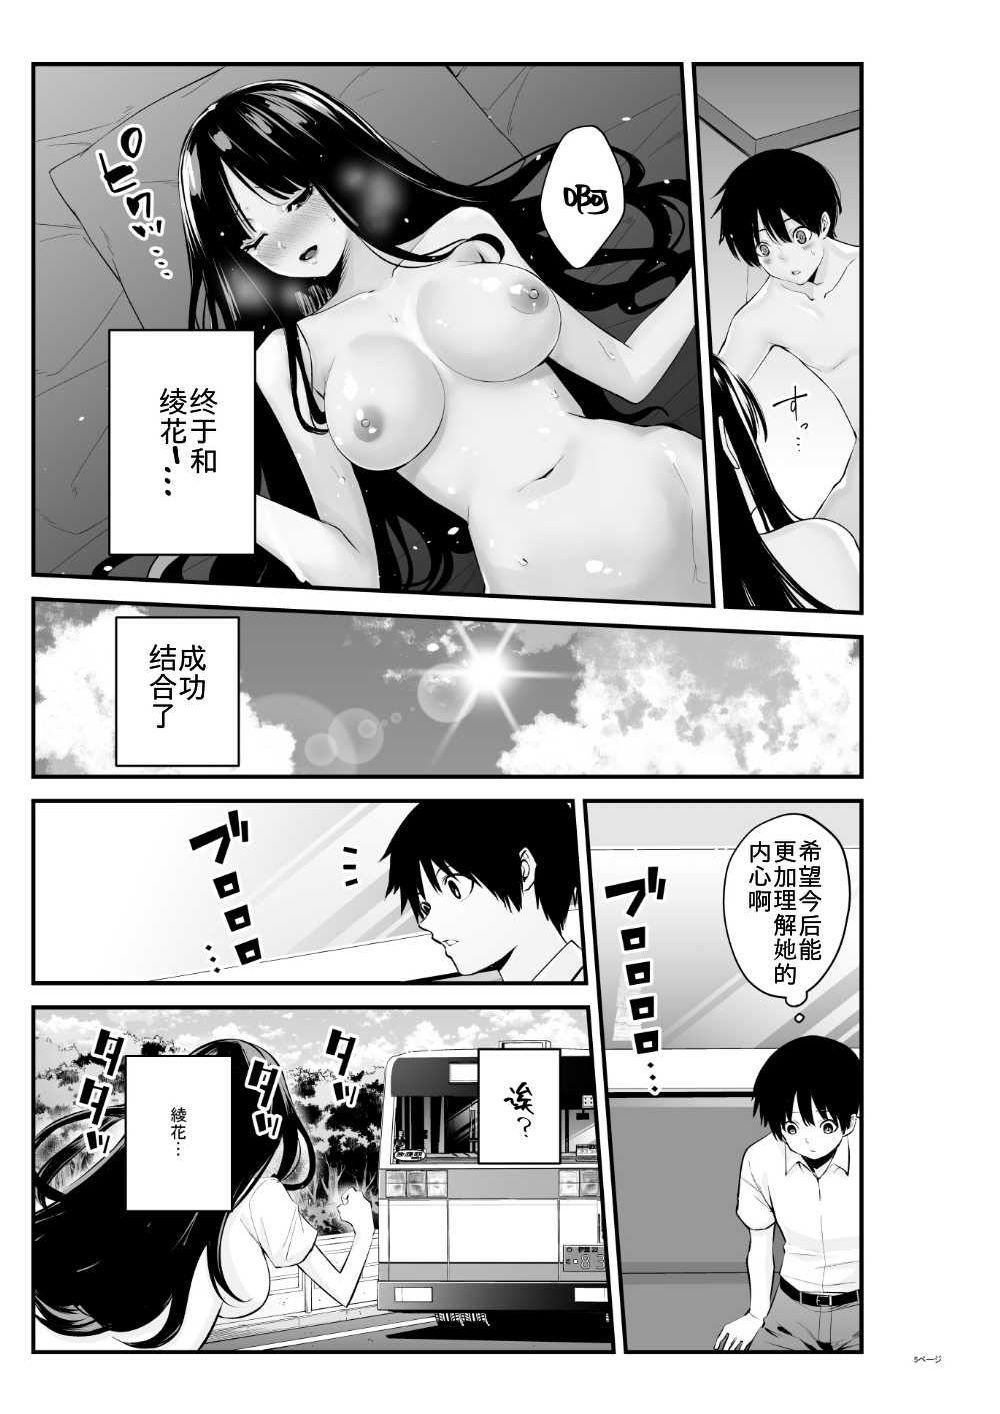 Squirting [Penguin Tank] Semishigure[Chinese]【不可视汉化】 - Original Barely 18 Porn - Page 7